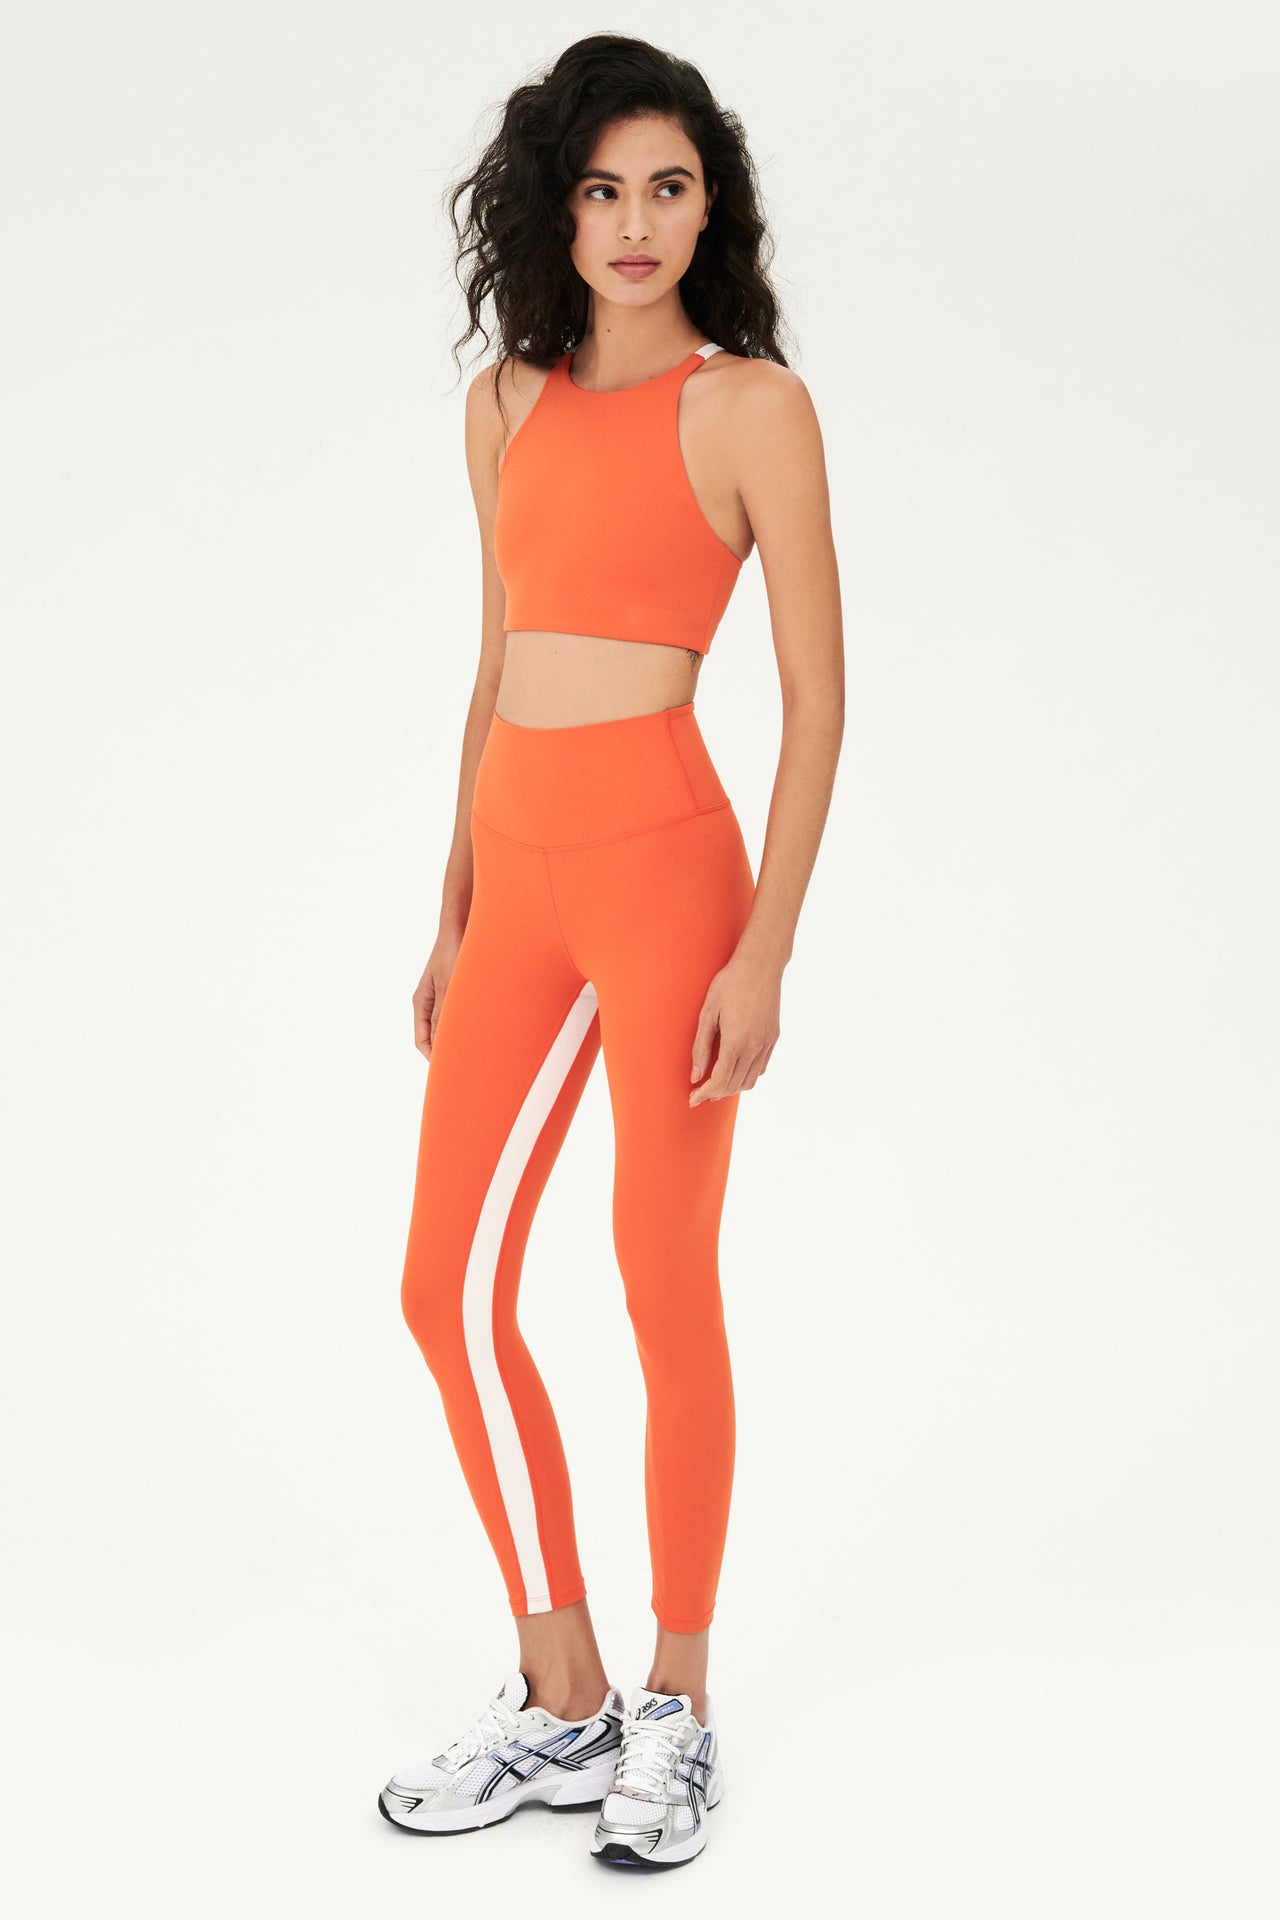 Full body, side, shot of woman with dark hair in orange tights and orange bra with white stripe on inseam